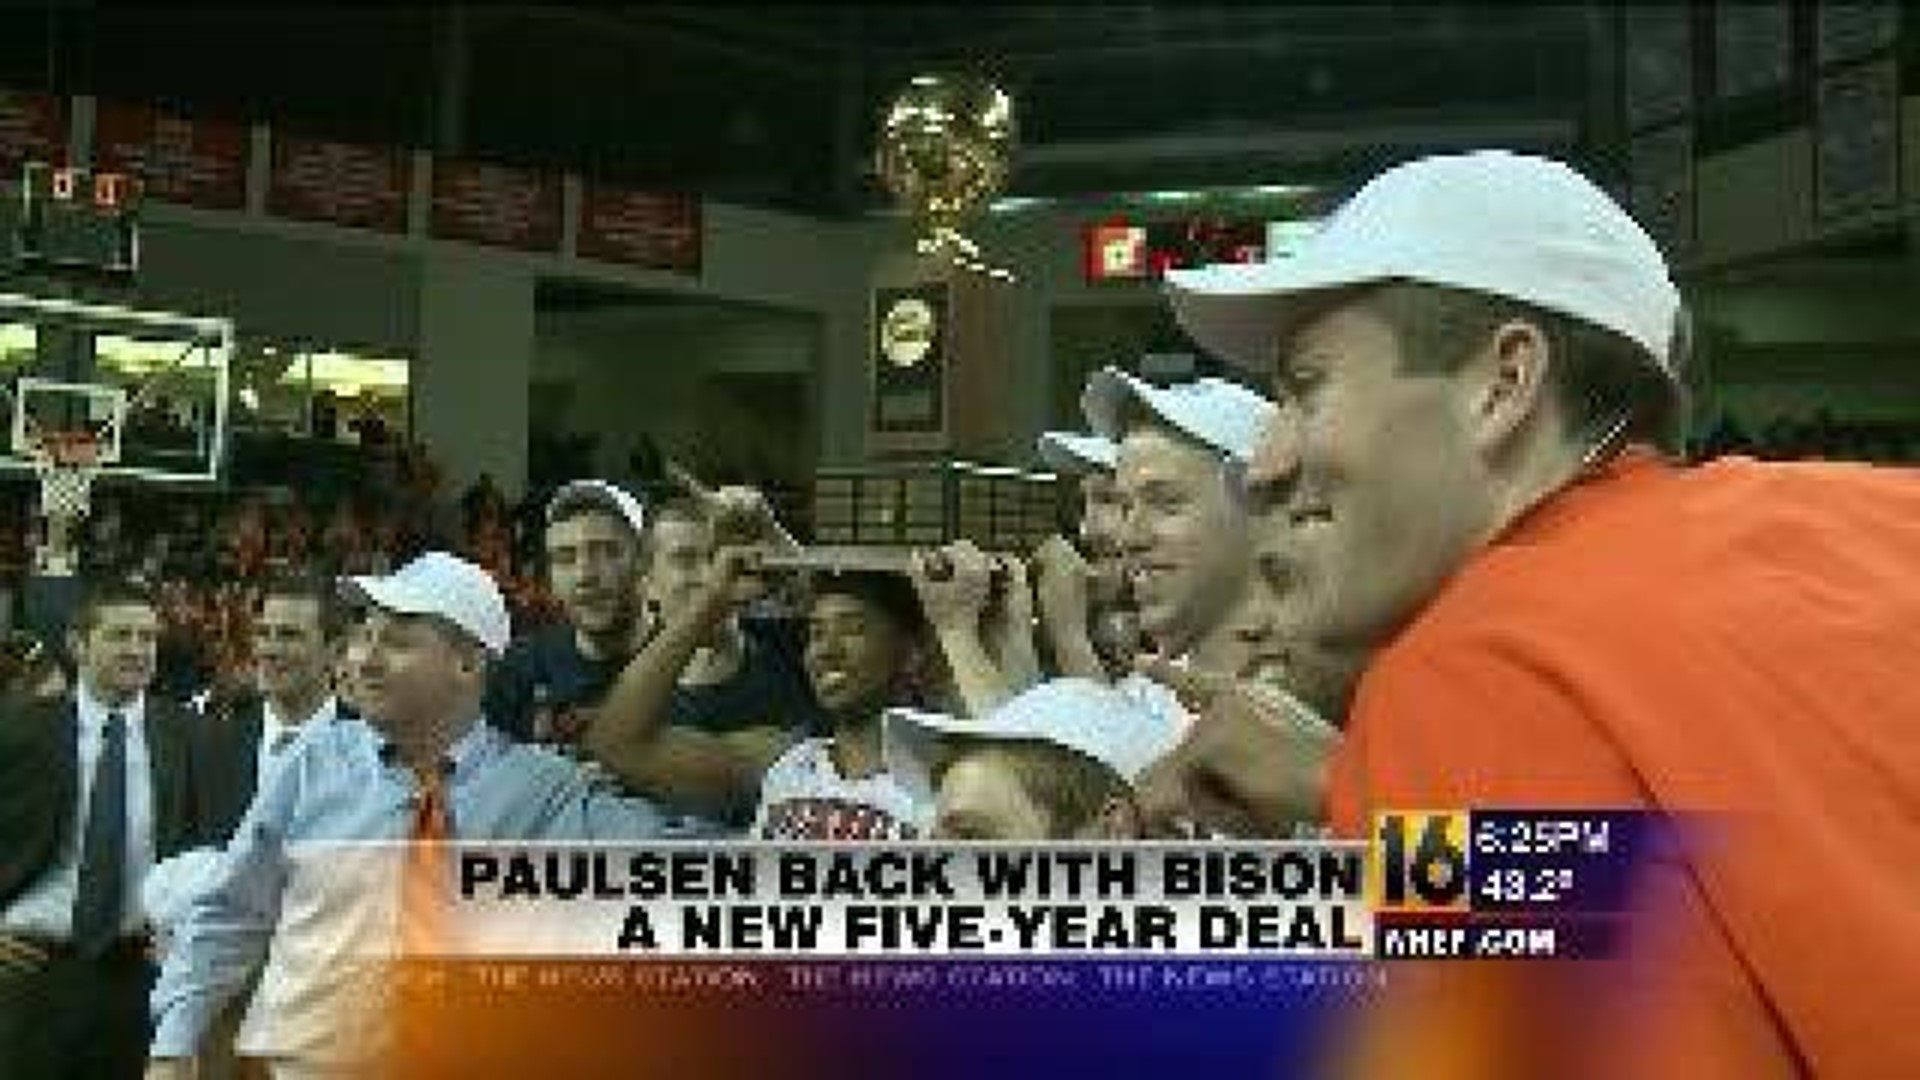 Paulsen Signs 5 Year Contract With Bucknell